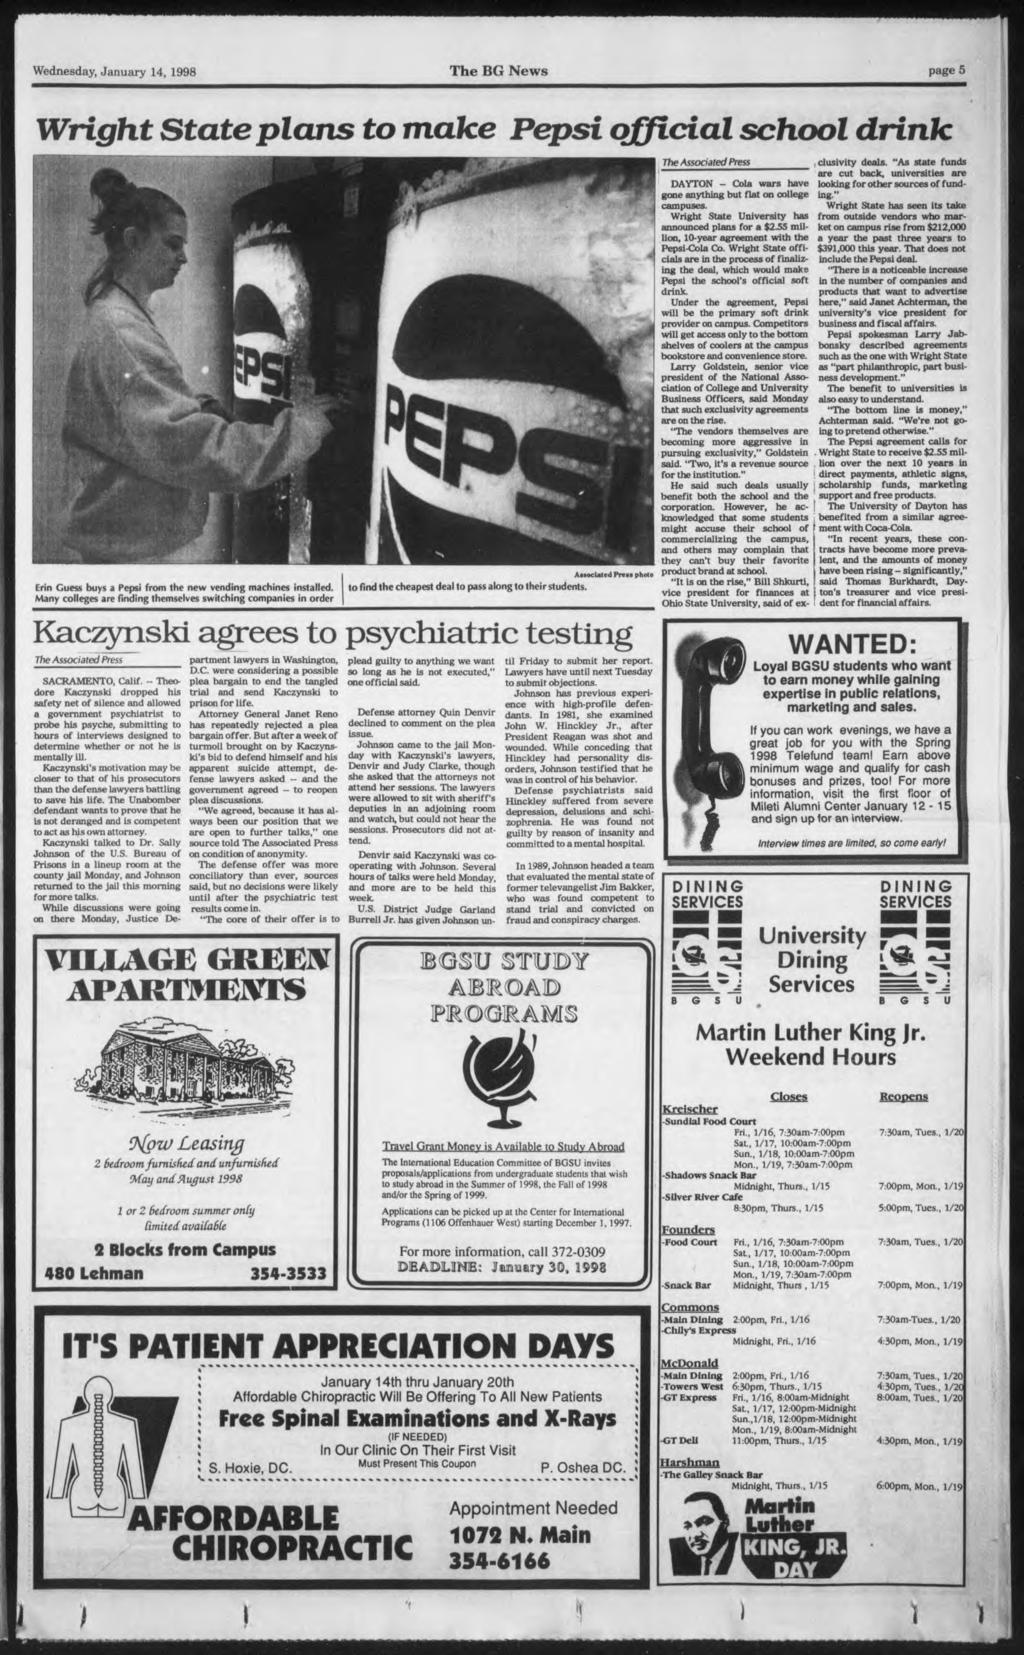 Wednesday, January 14, 1998 The BG News page 5 Wrght State plans to make Peps (offcal school drnk: Ern Guess buys a Peps from the new vendng machnes nstalled.